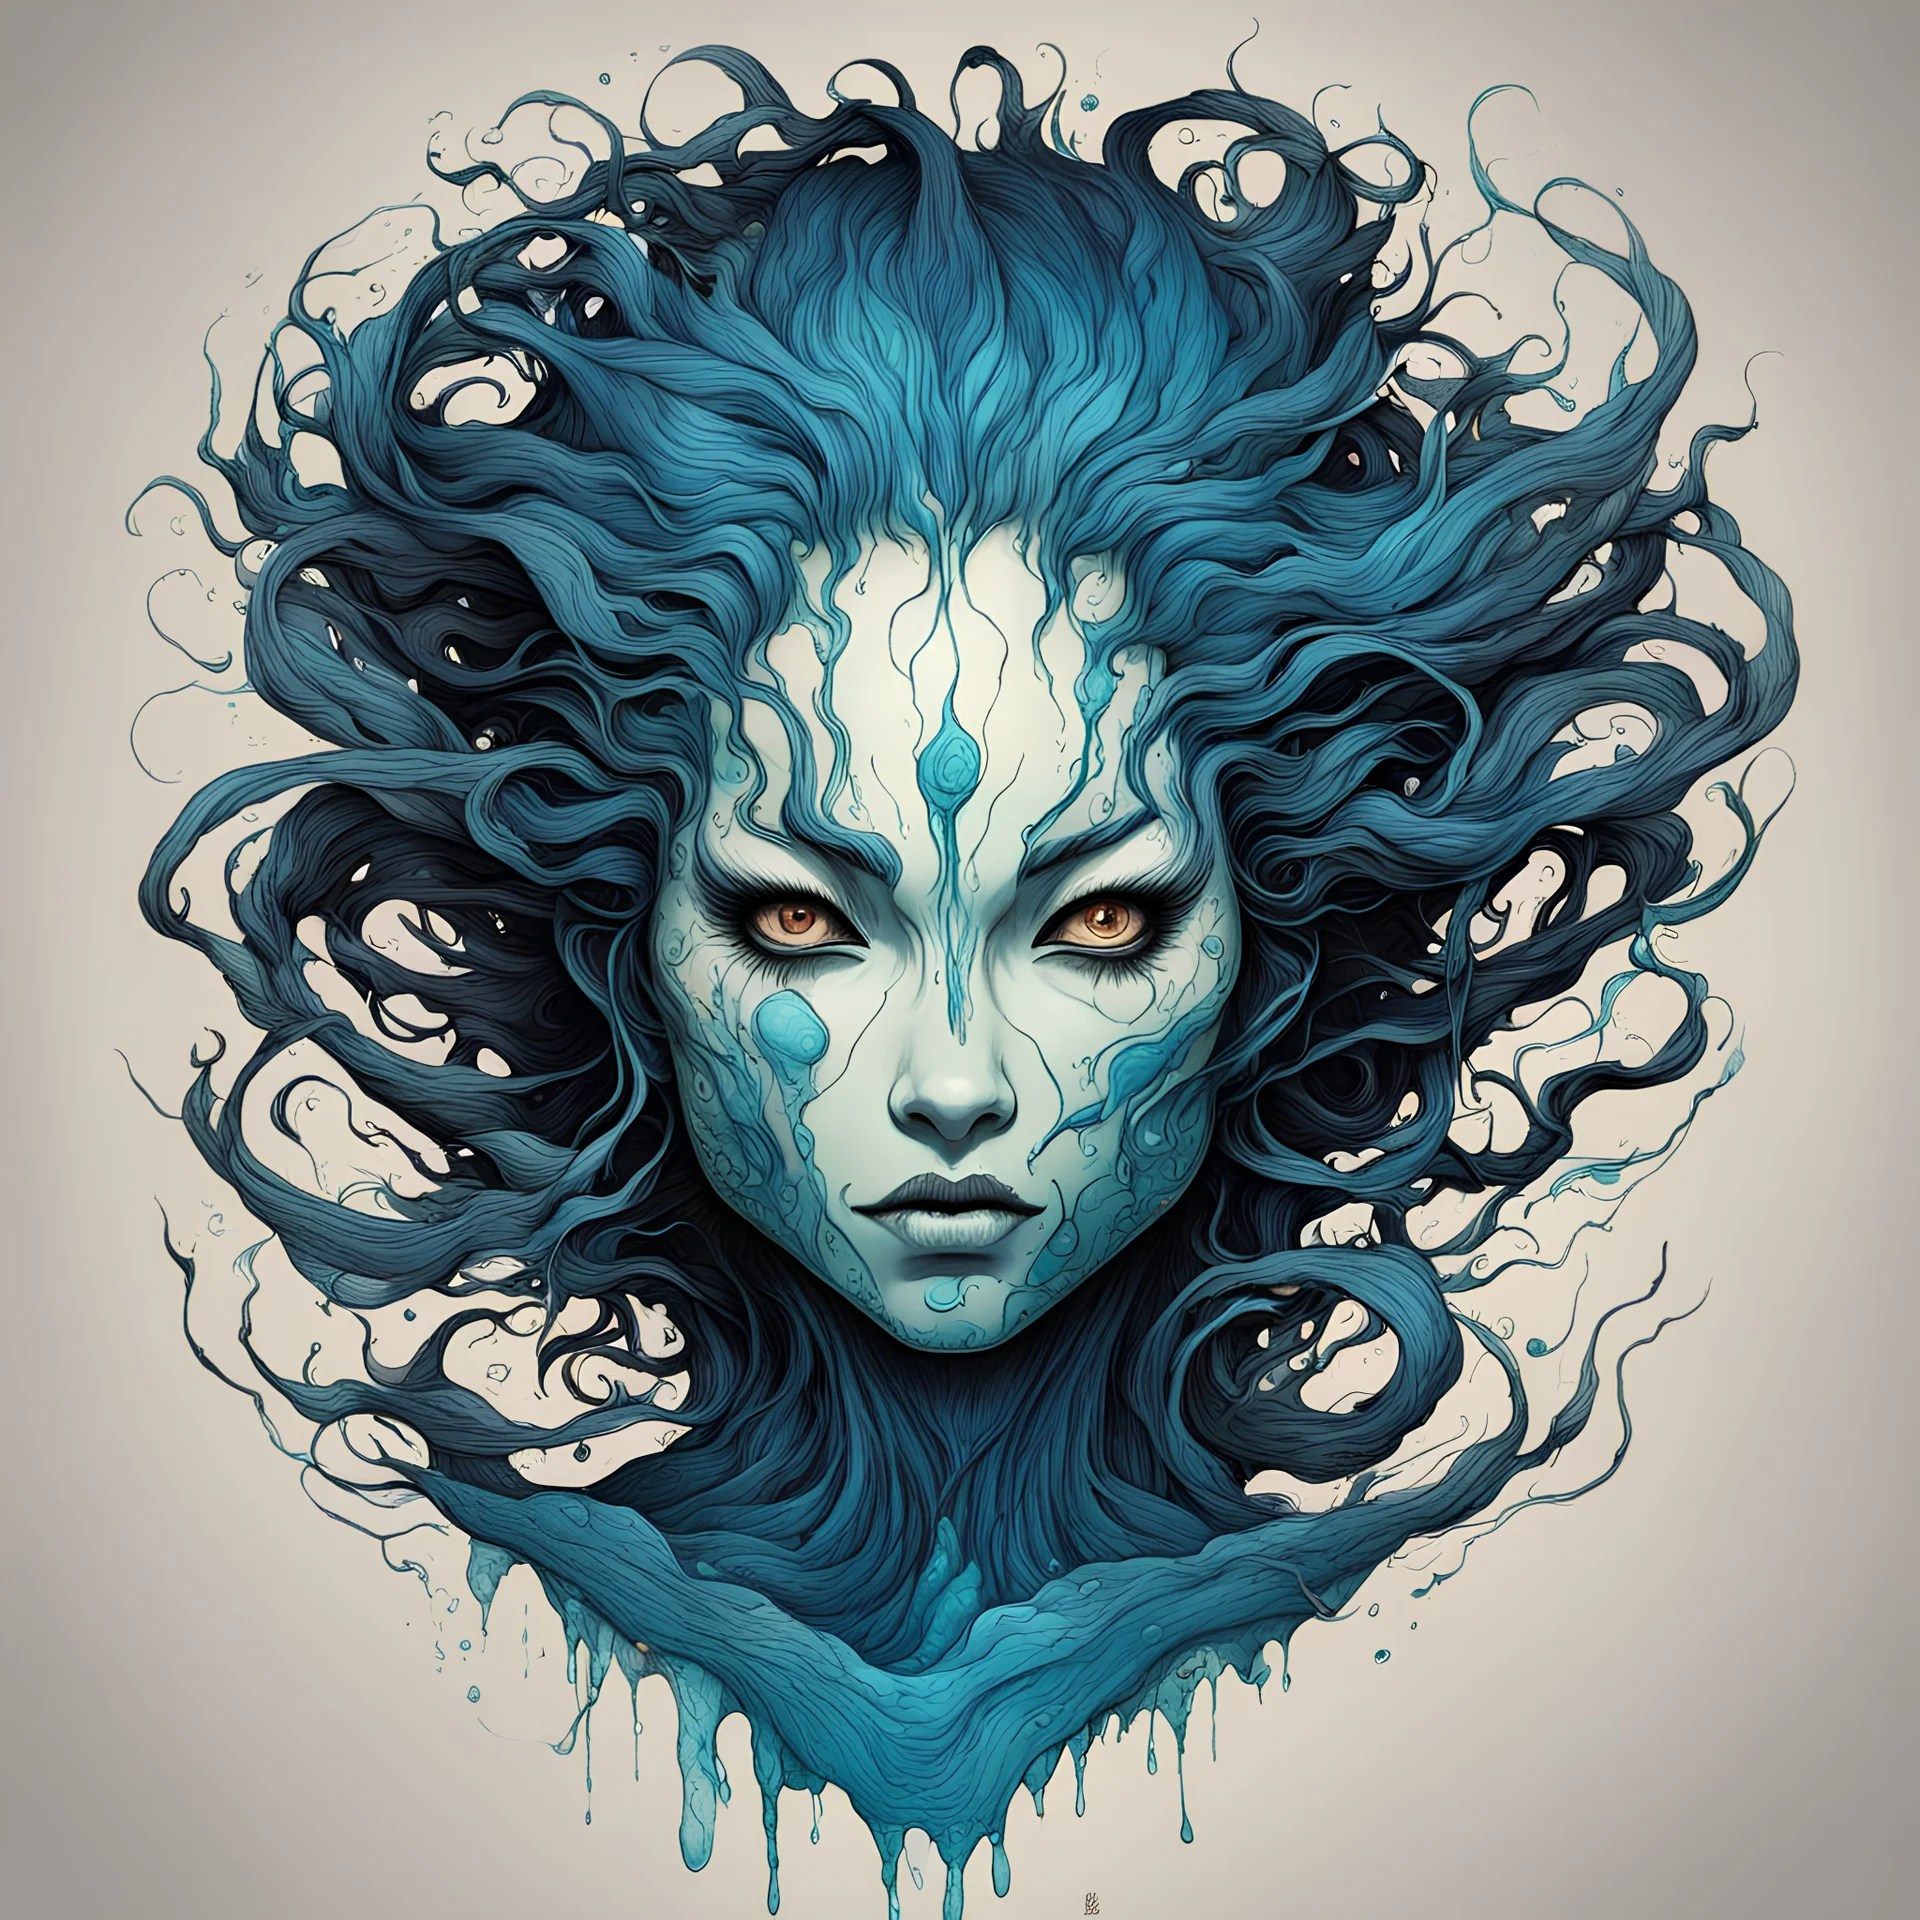 front facing full body illustration of a disembodied, malevolent shape shifting female Funayurei water spirit with highly detailed facial features and skin textures, in the style of Alex Pardee , Jean Giraud Moebius, and Katsushika Hokusai, highly detailed, boldly inked, deep murky aquatic color